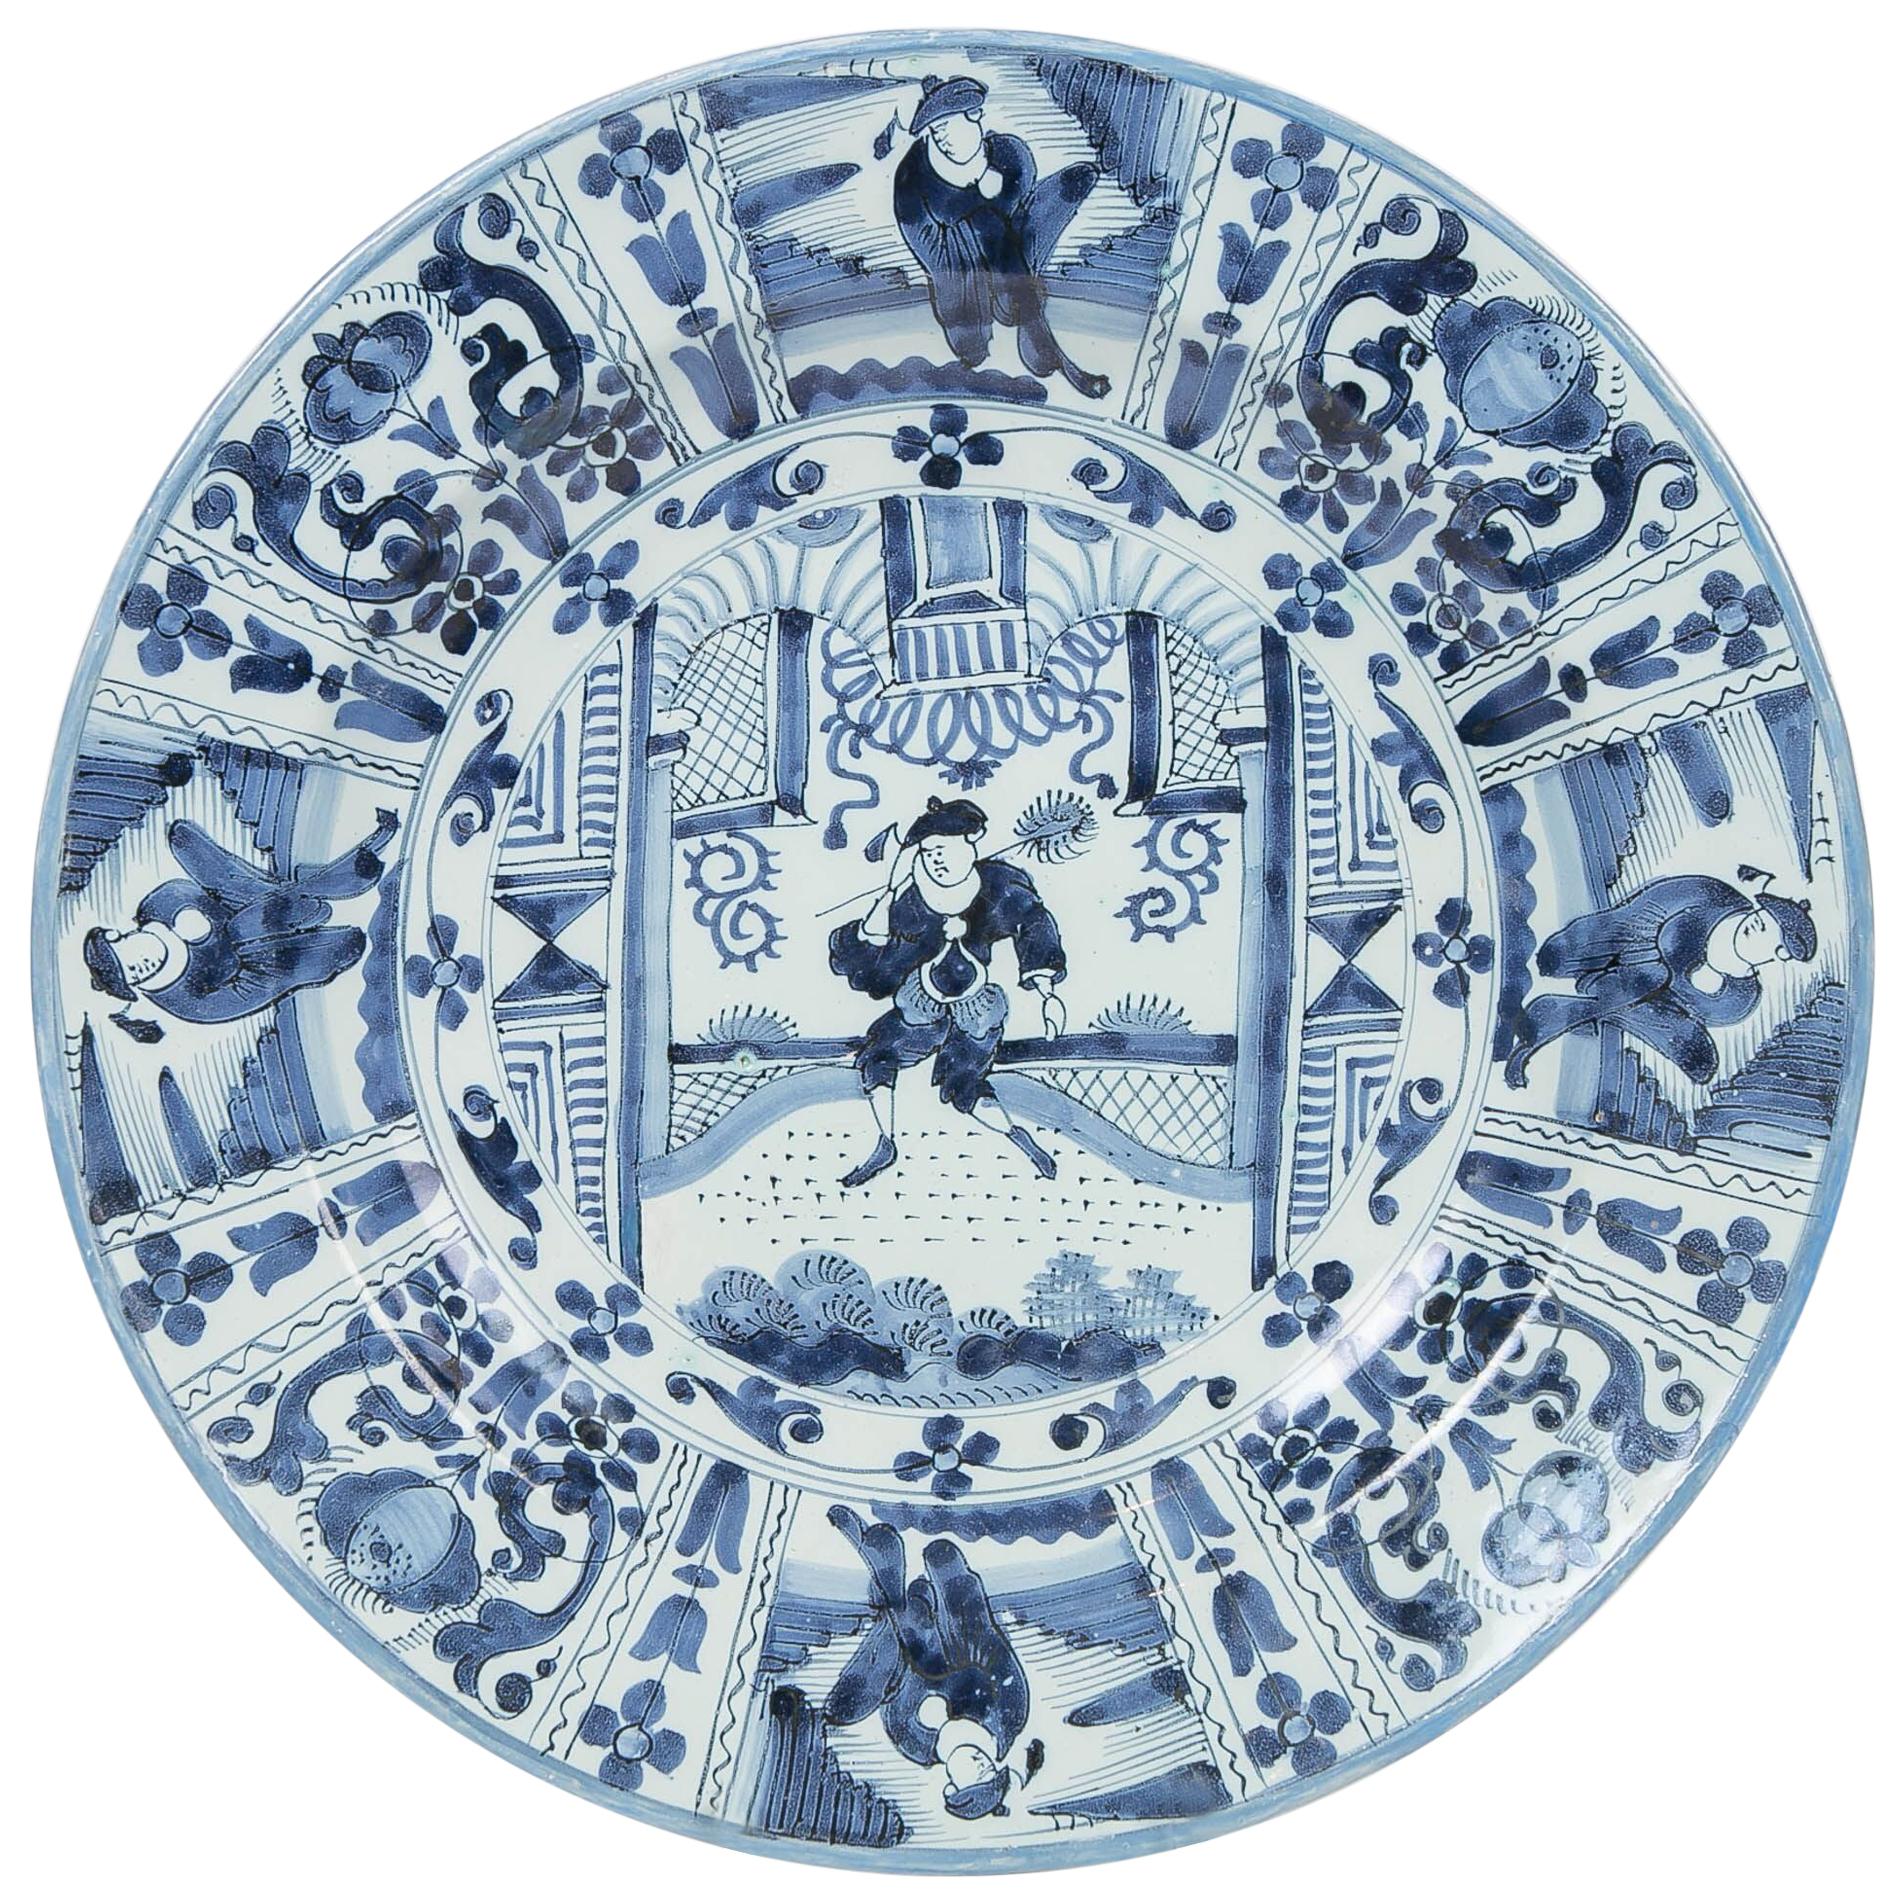 Delft Blue and White Charger with Chinoiserie Decoration Made 18th Century